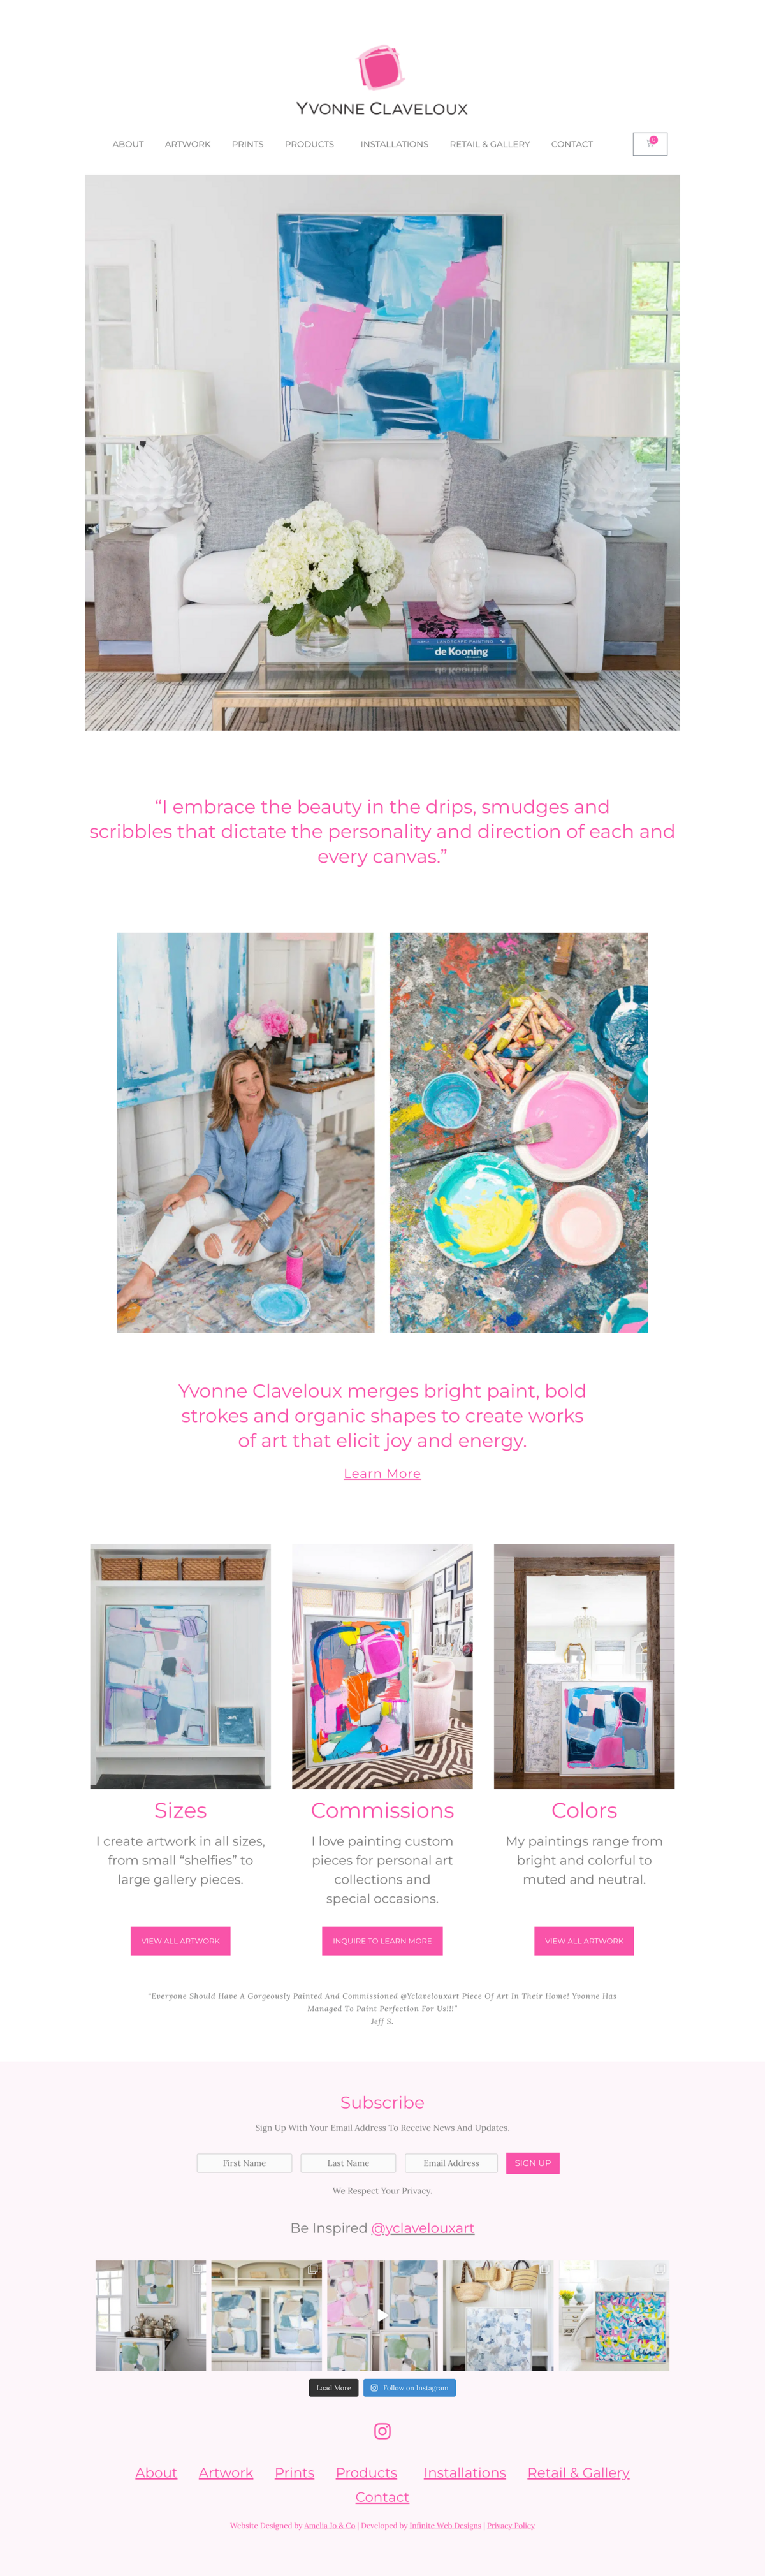 Homepage design of  Yvonne Claveloux website featuring her work installed in a living room